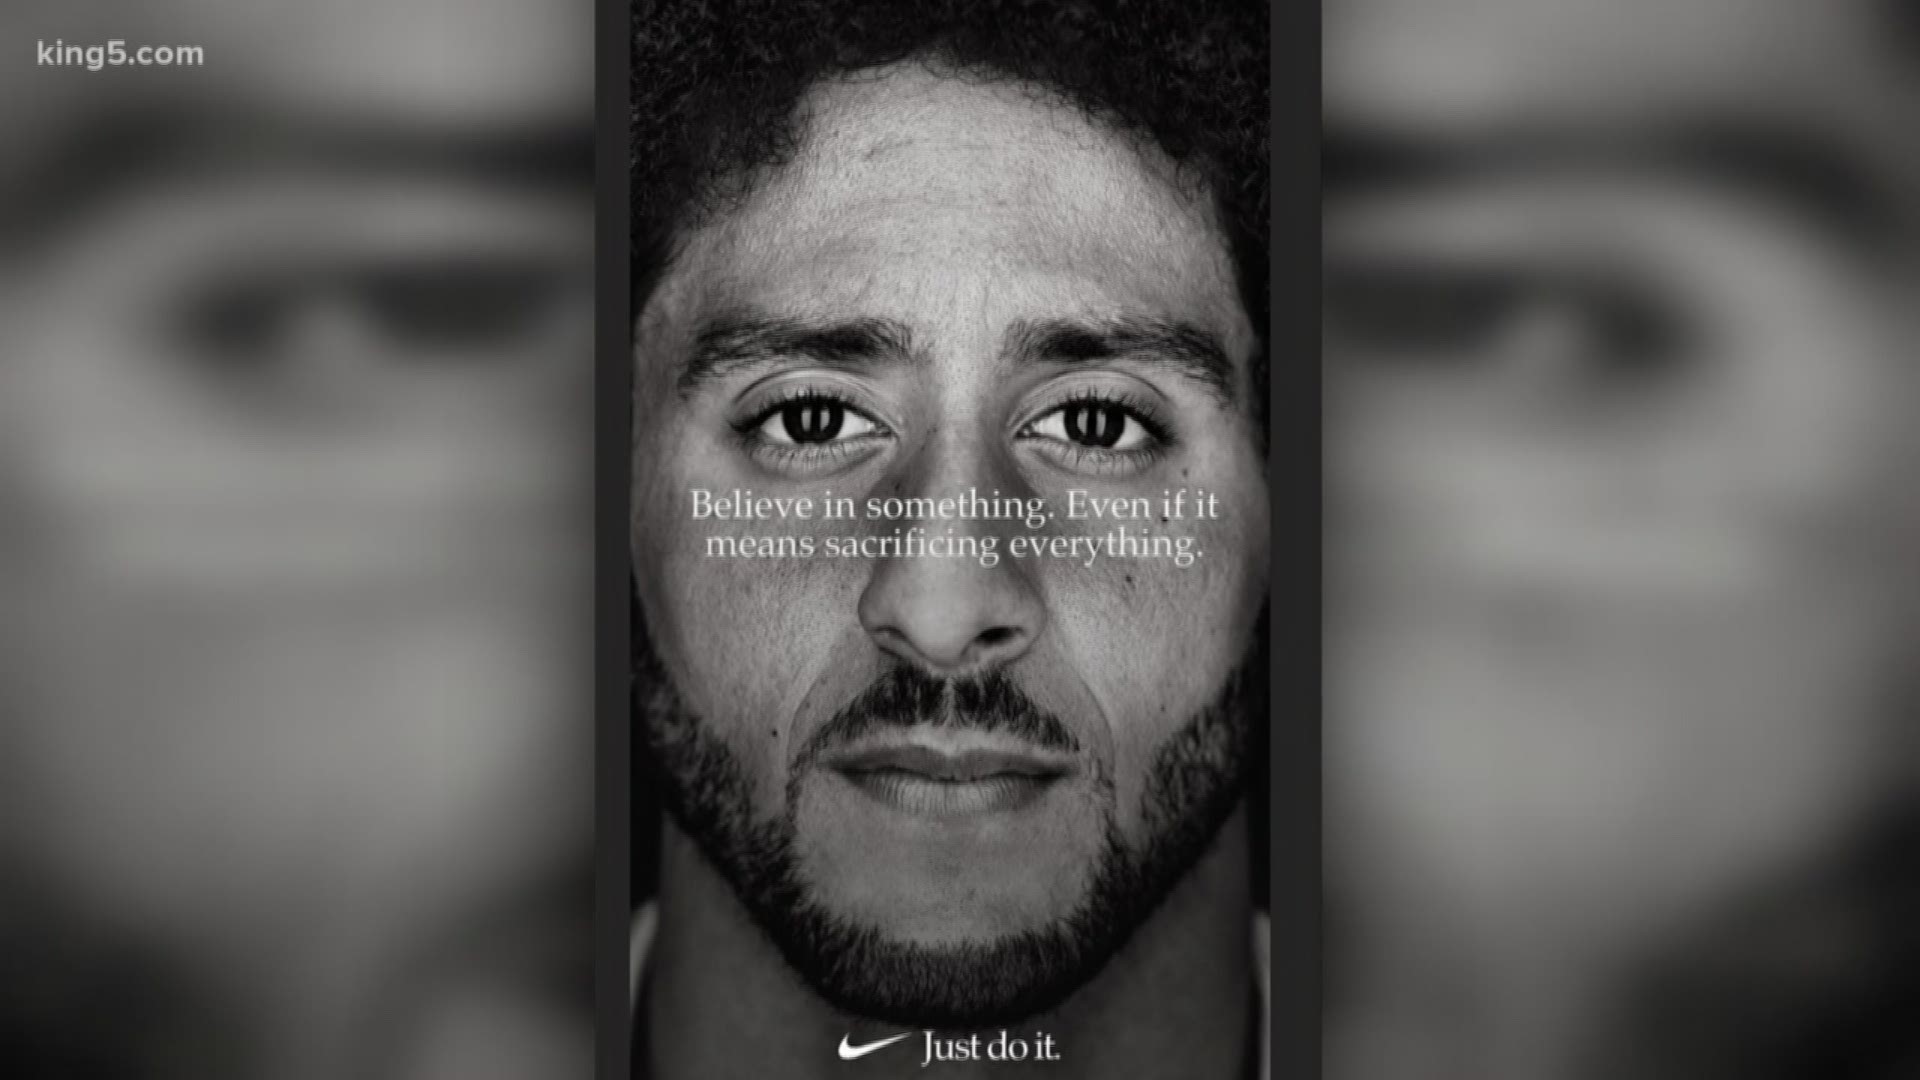 Colin Kaepernick, who has been both revered and reviled for taking a knee to protest racial injustice during the national anthem, is the face of Nike's 30th anniversary 'Just Do It' campaign.